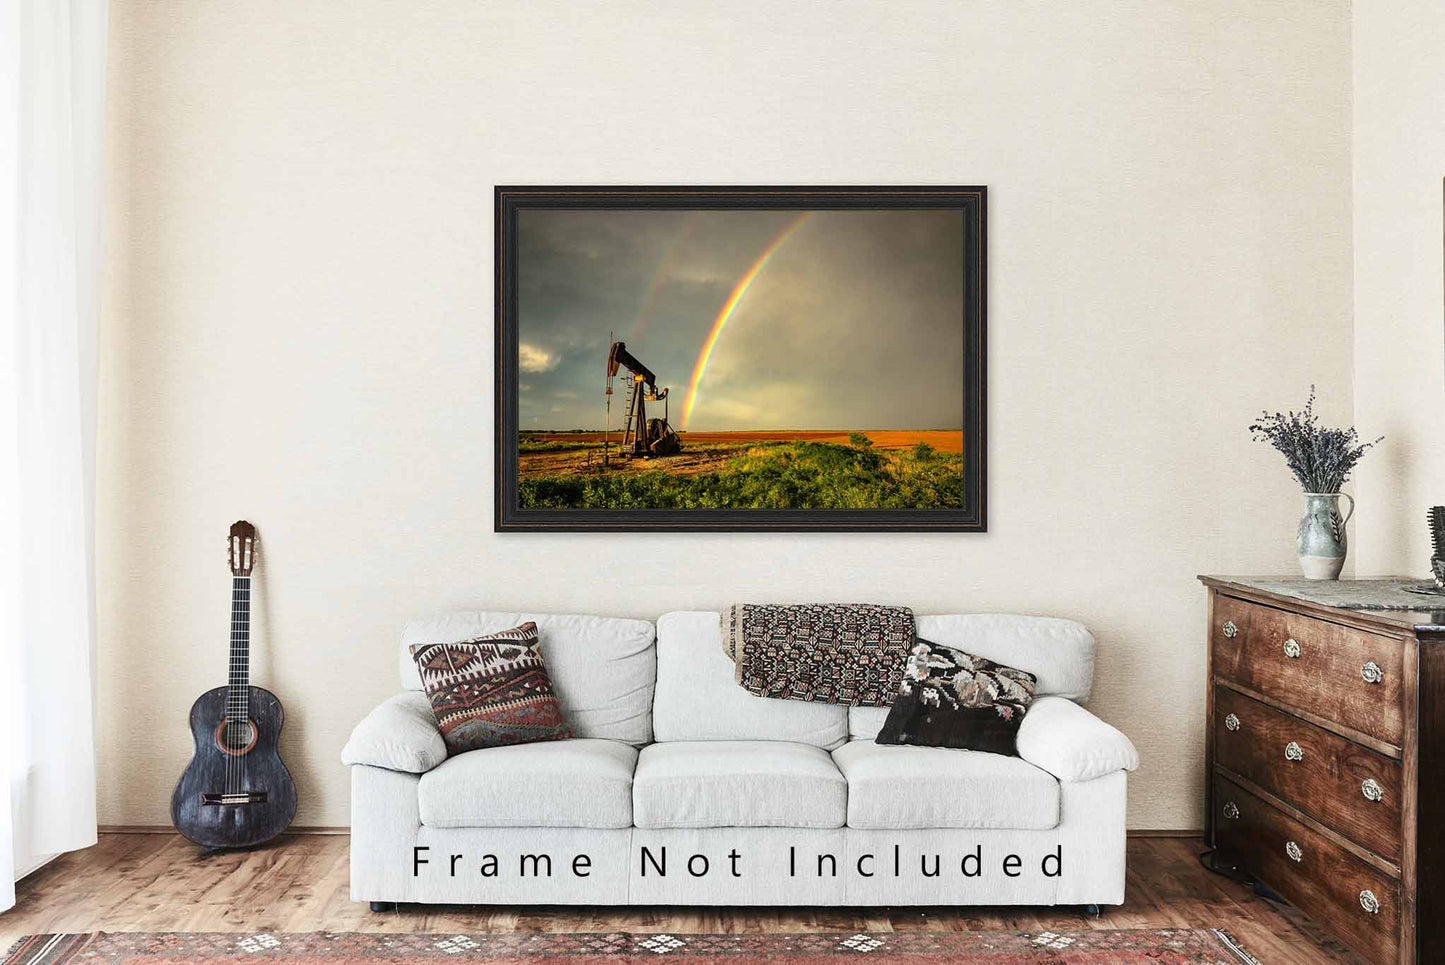 Oilfield Photography Print (Not Framed) Picture of Rainbow Ending at Pump Jack on Stormy Day in Texas Oil and Gas Wall Art Energy Decor